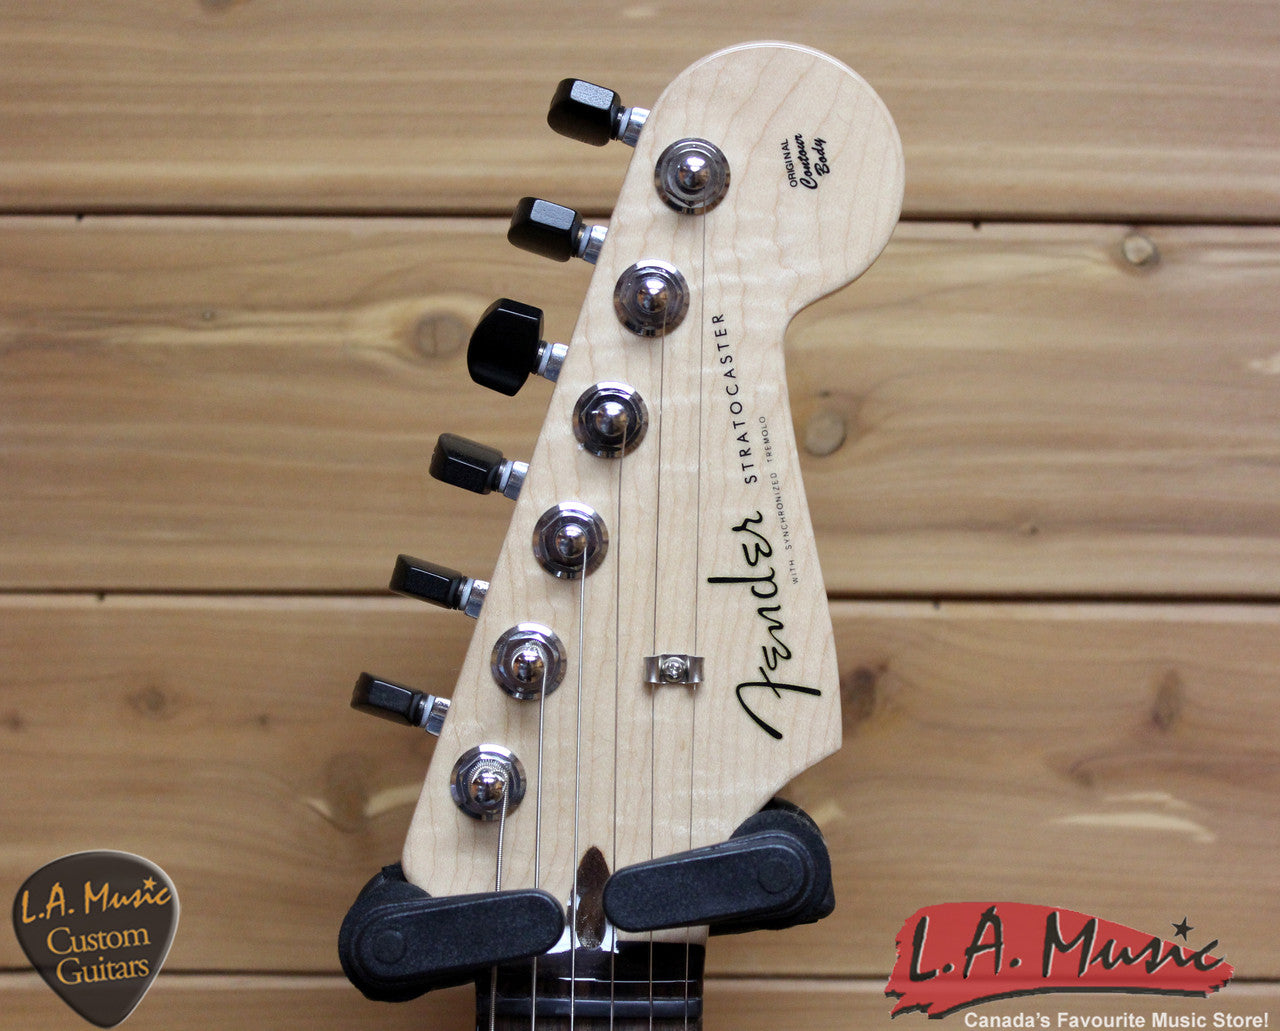 Fender Custom Shop Spalted Maple Top Artisan Stratocaster'', Rosewood Fingerboard, Buckeye Finish 1510110151 - L.A. Music - Canada's Favourite Music Store!